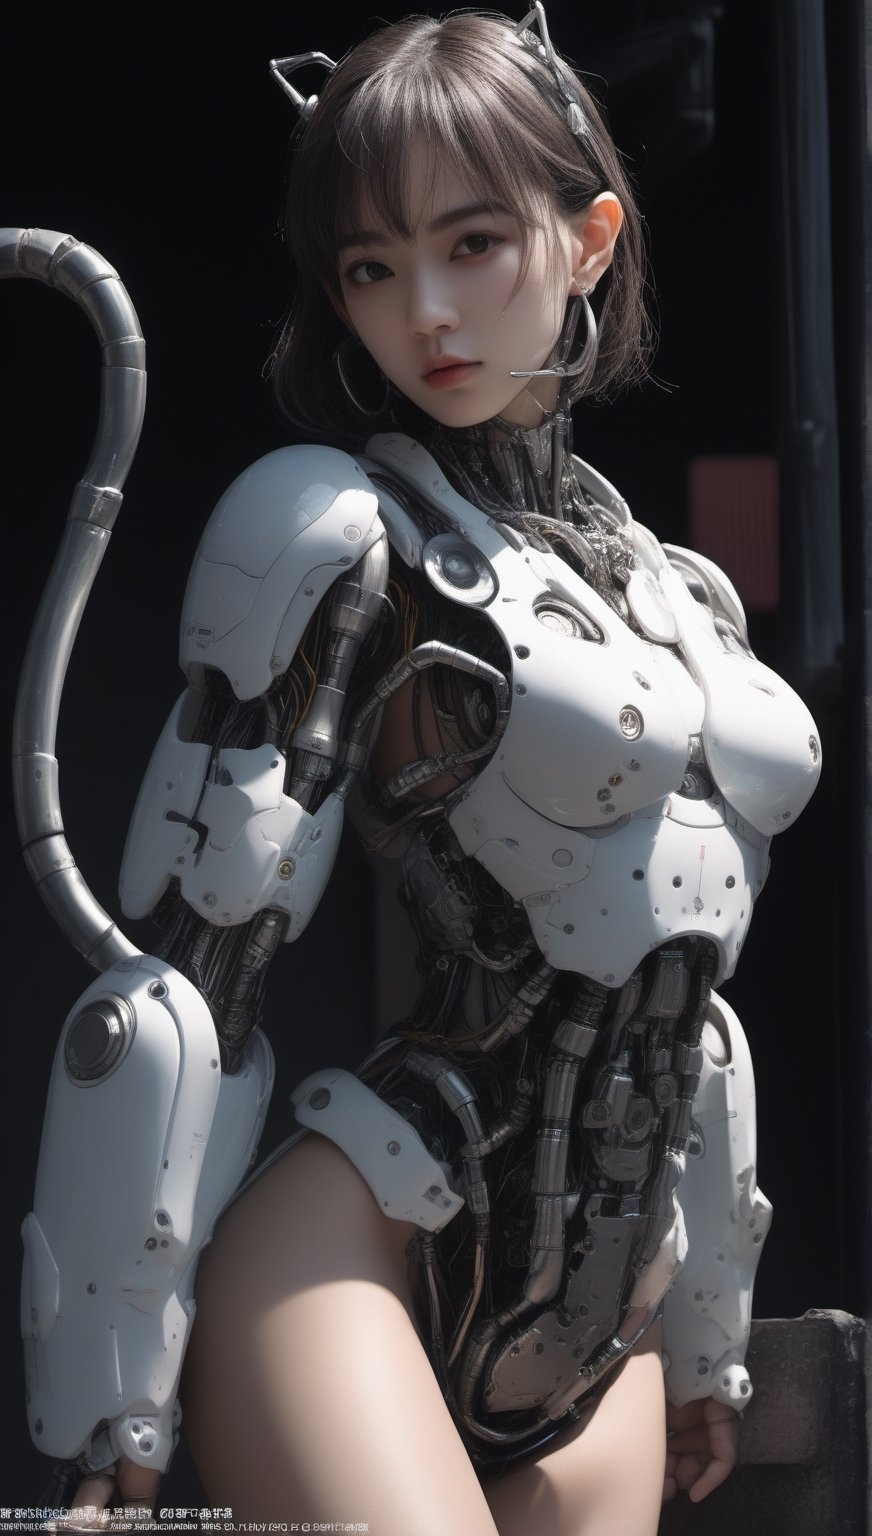 beautiful Japan cyborg girl, with super delicate face, skinny plump figure ,mechanical joints, metal details,cyberpunk,sidesexwithfeet